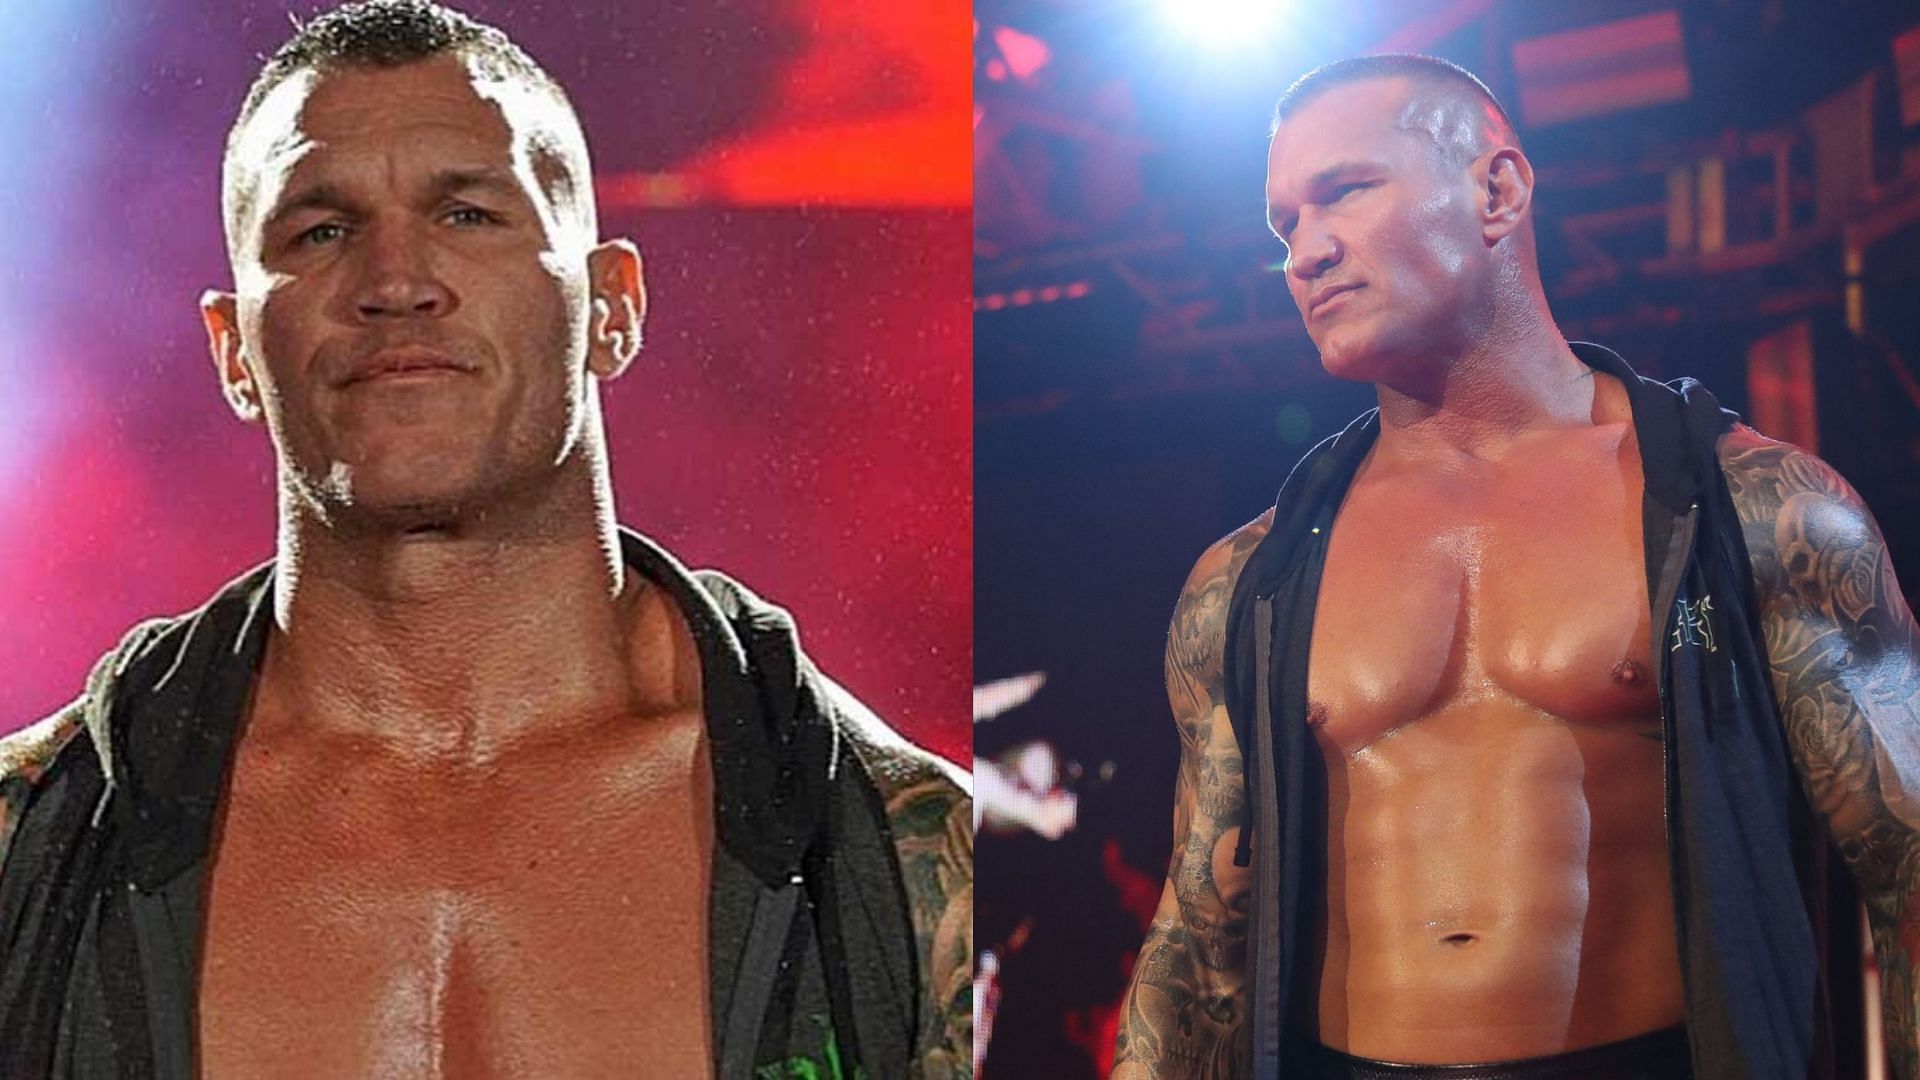 Randy Orton may have his next feud in WWE set